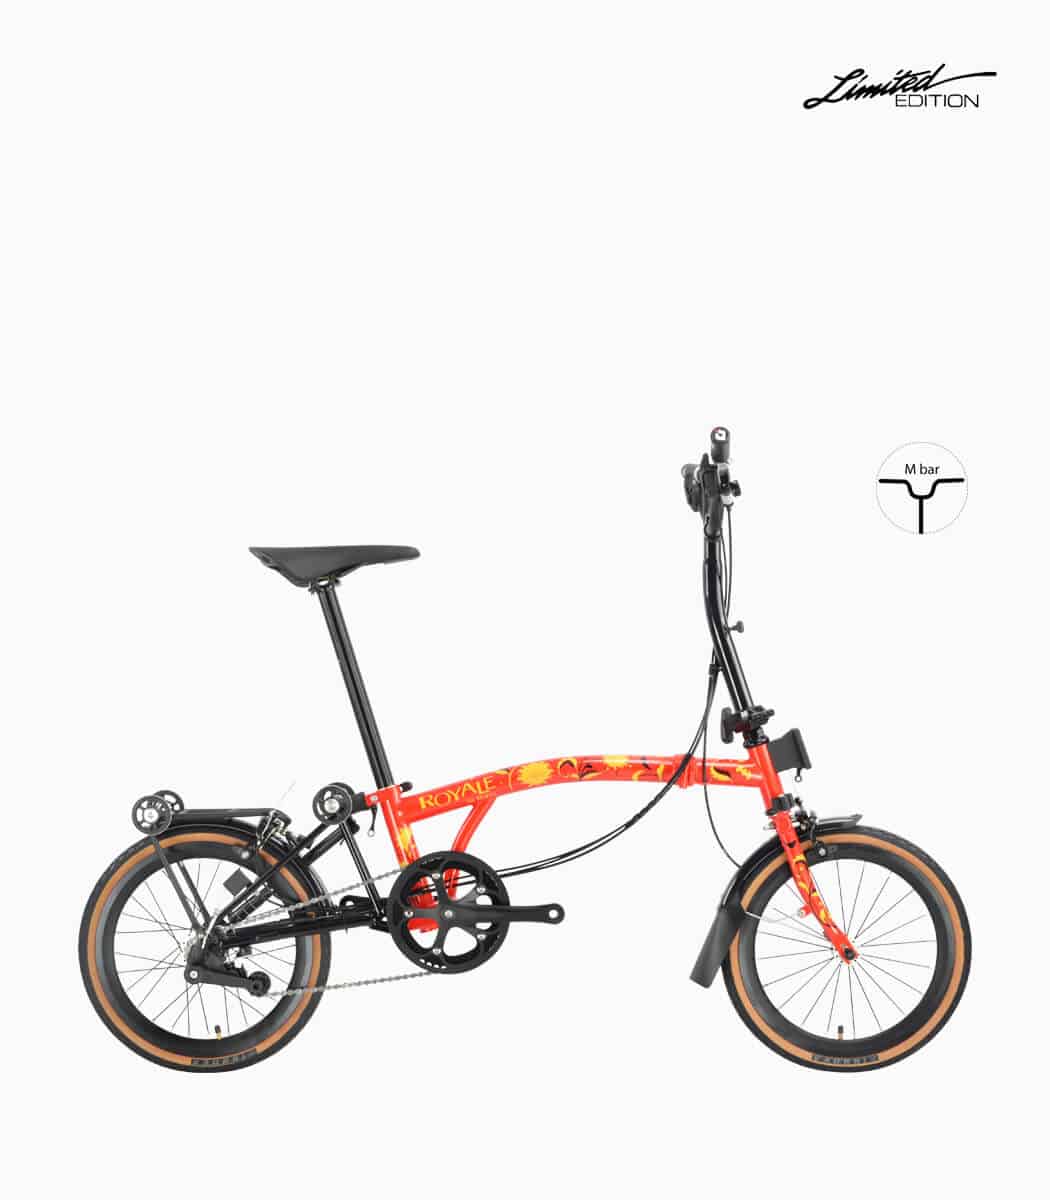 MOBOT ROYALE M6 HAPPINESS WUFU foldable bicycle M bar with tanwall tyres high profile rim right - Home